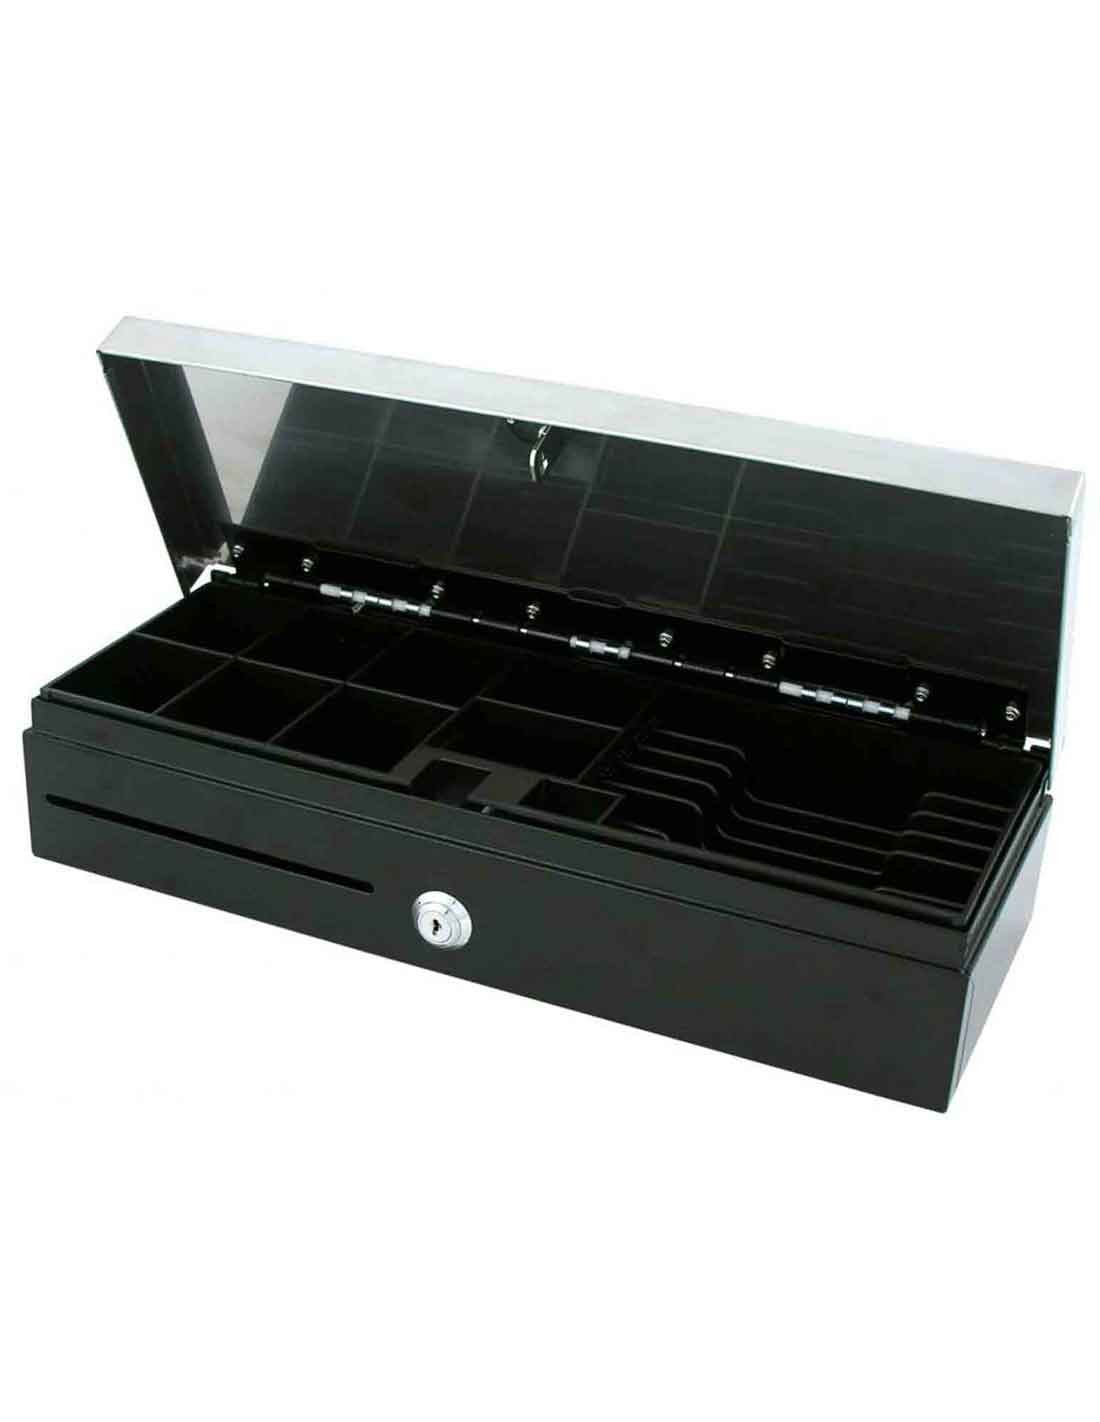 Flip-Top Cash Drawer Pozone PFT 4300 at a Cheap Price in Dubai Online Store for POS System